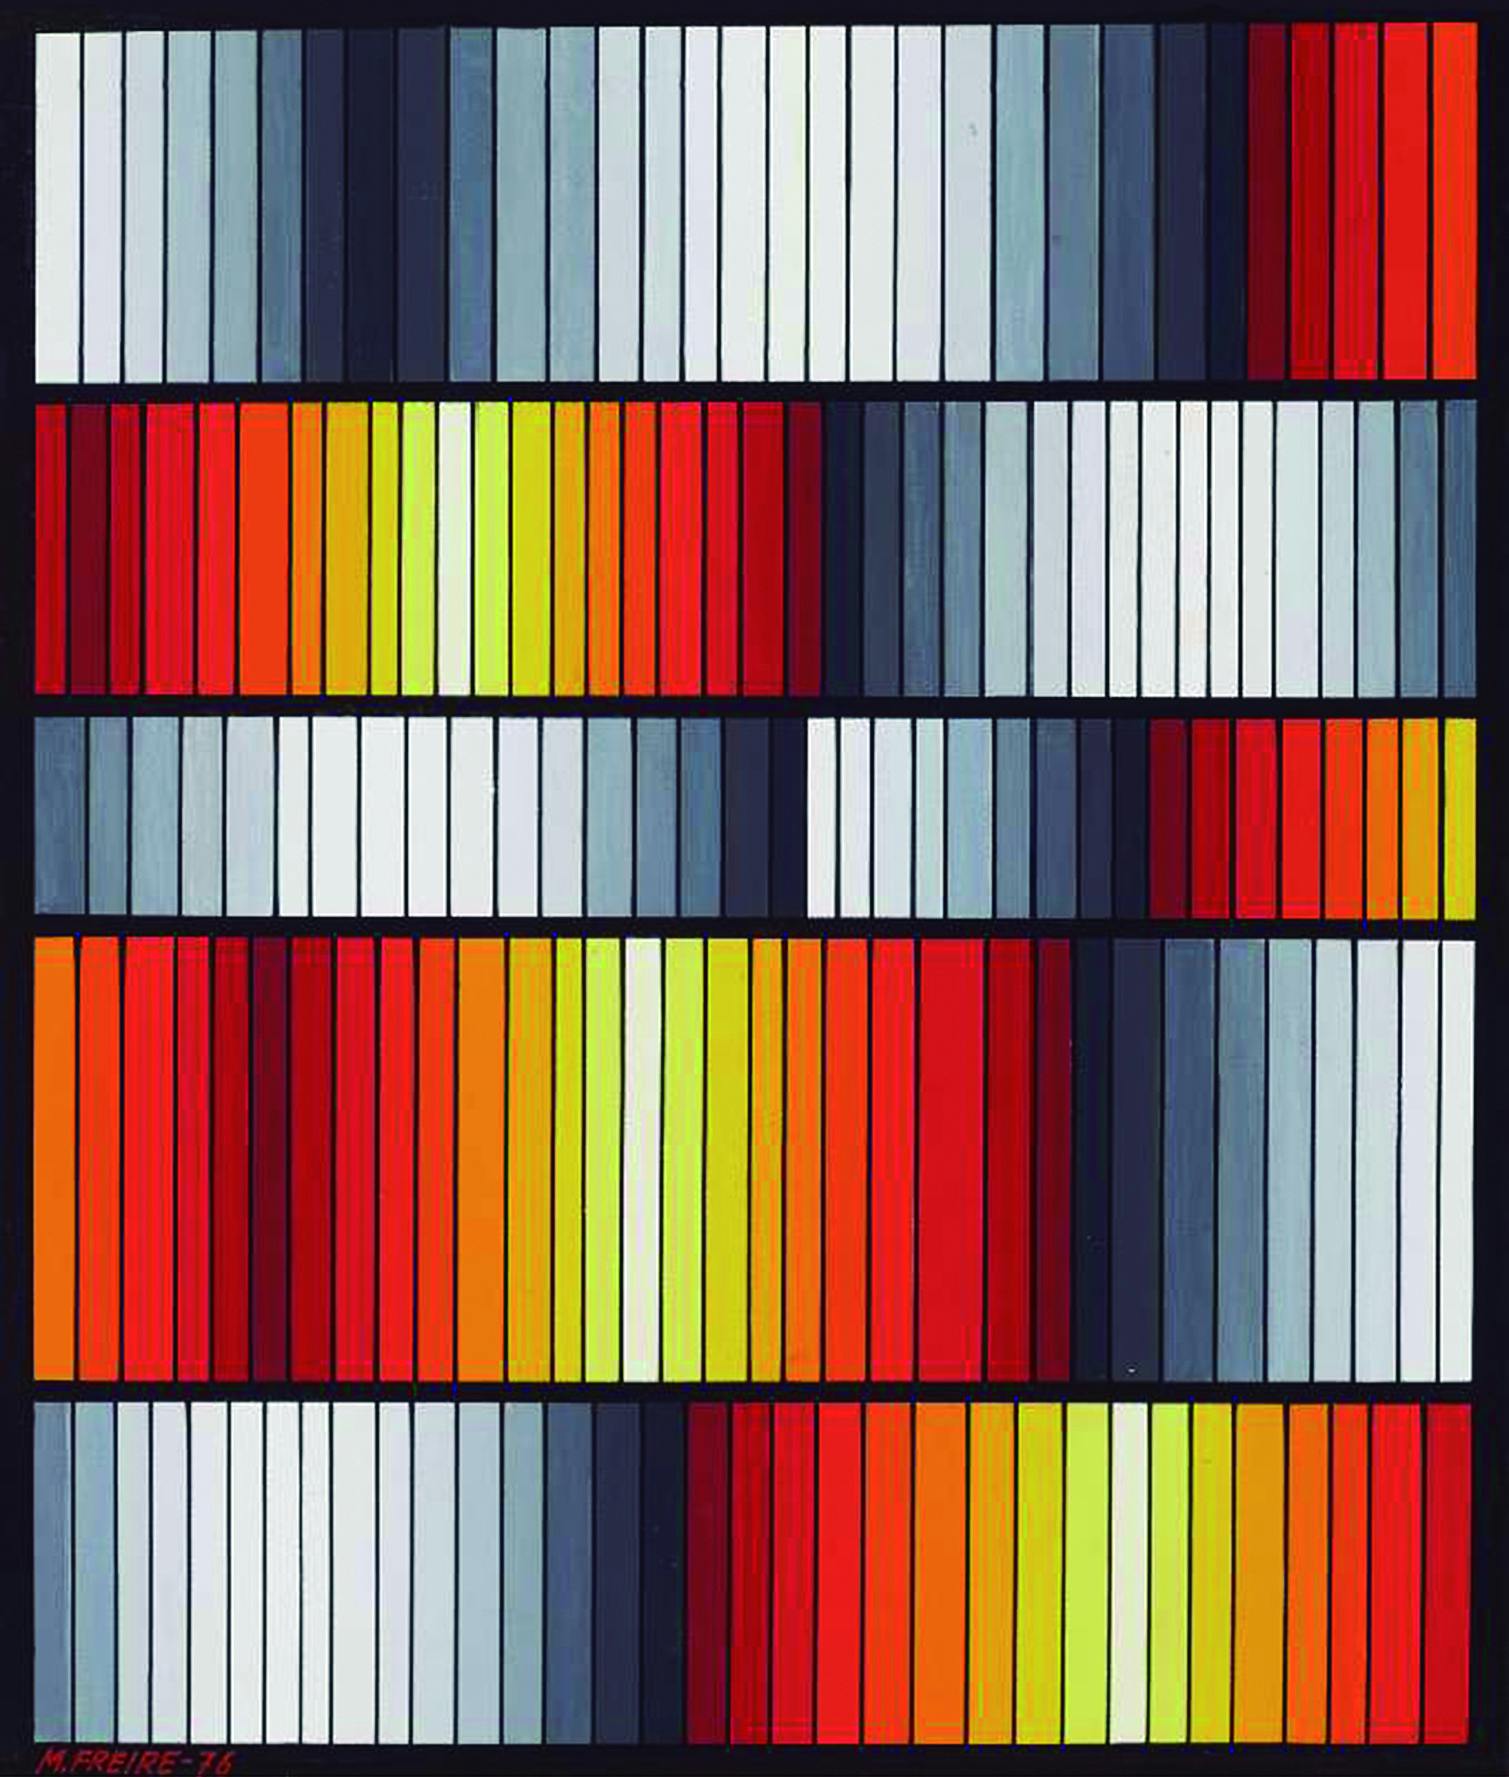 A painting of alternating grey shades and warm tones of red, orange and yellow in a grid.